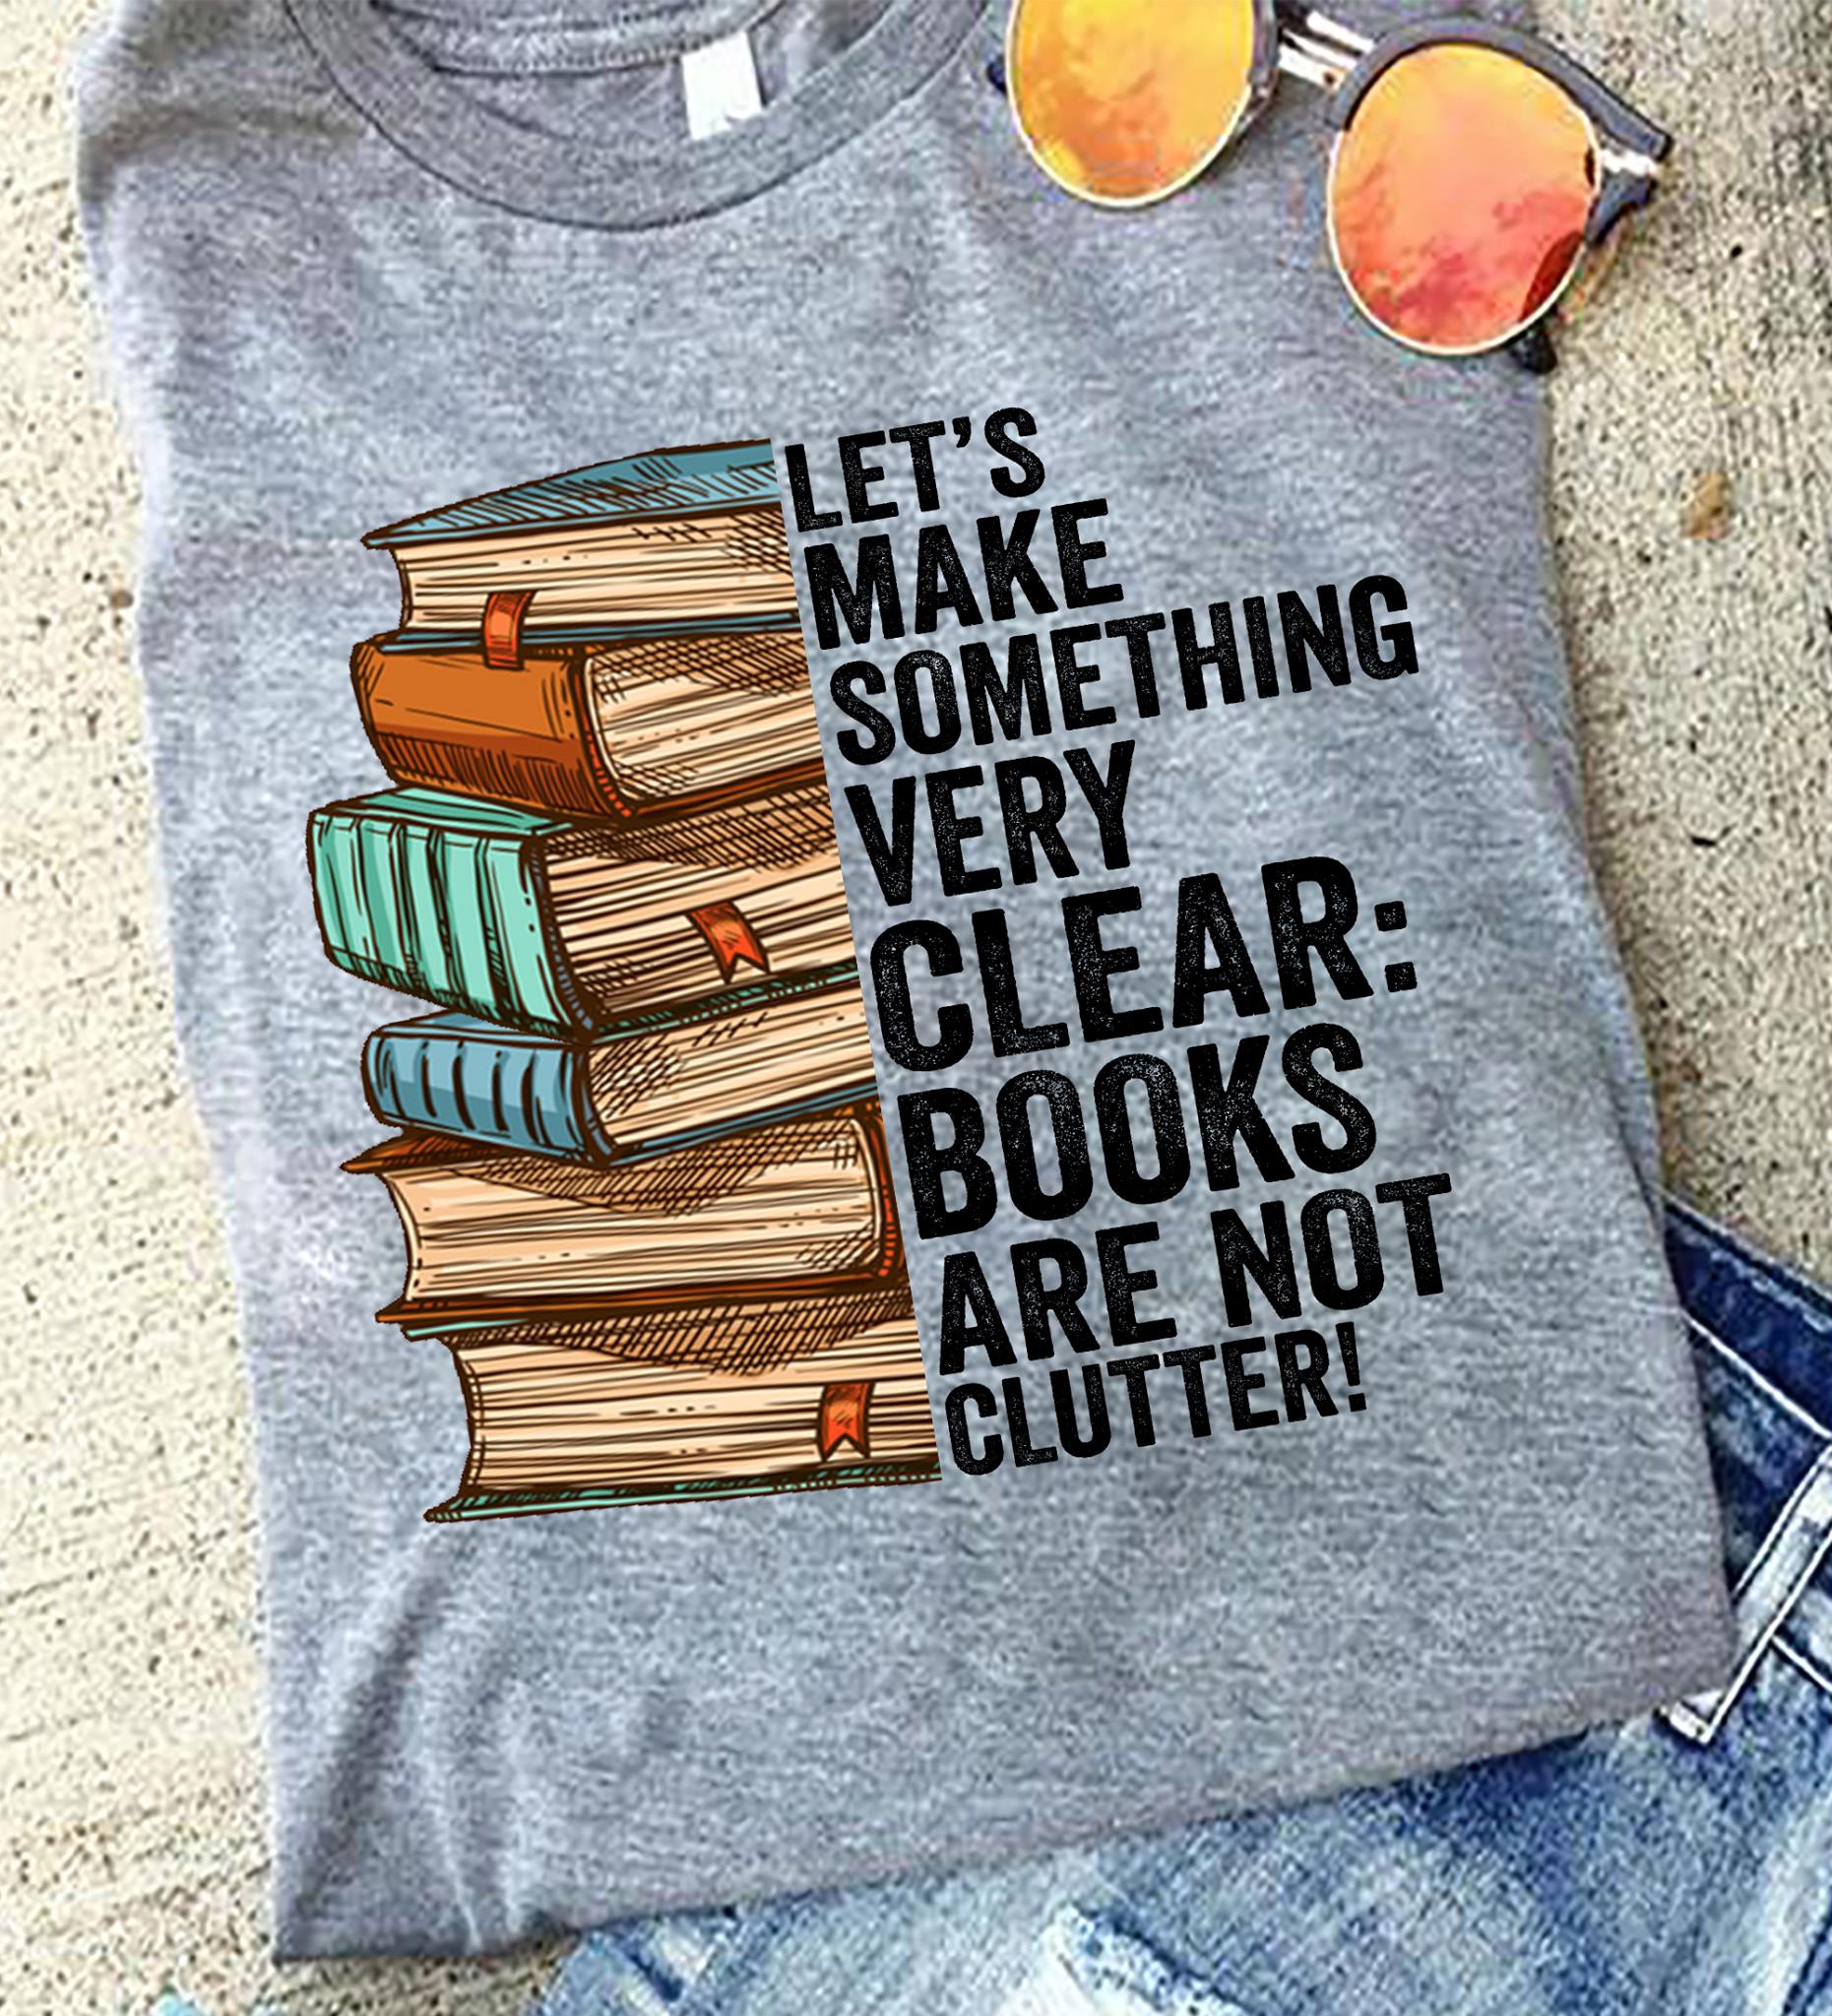 Let's make something very clear, books are not clutter